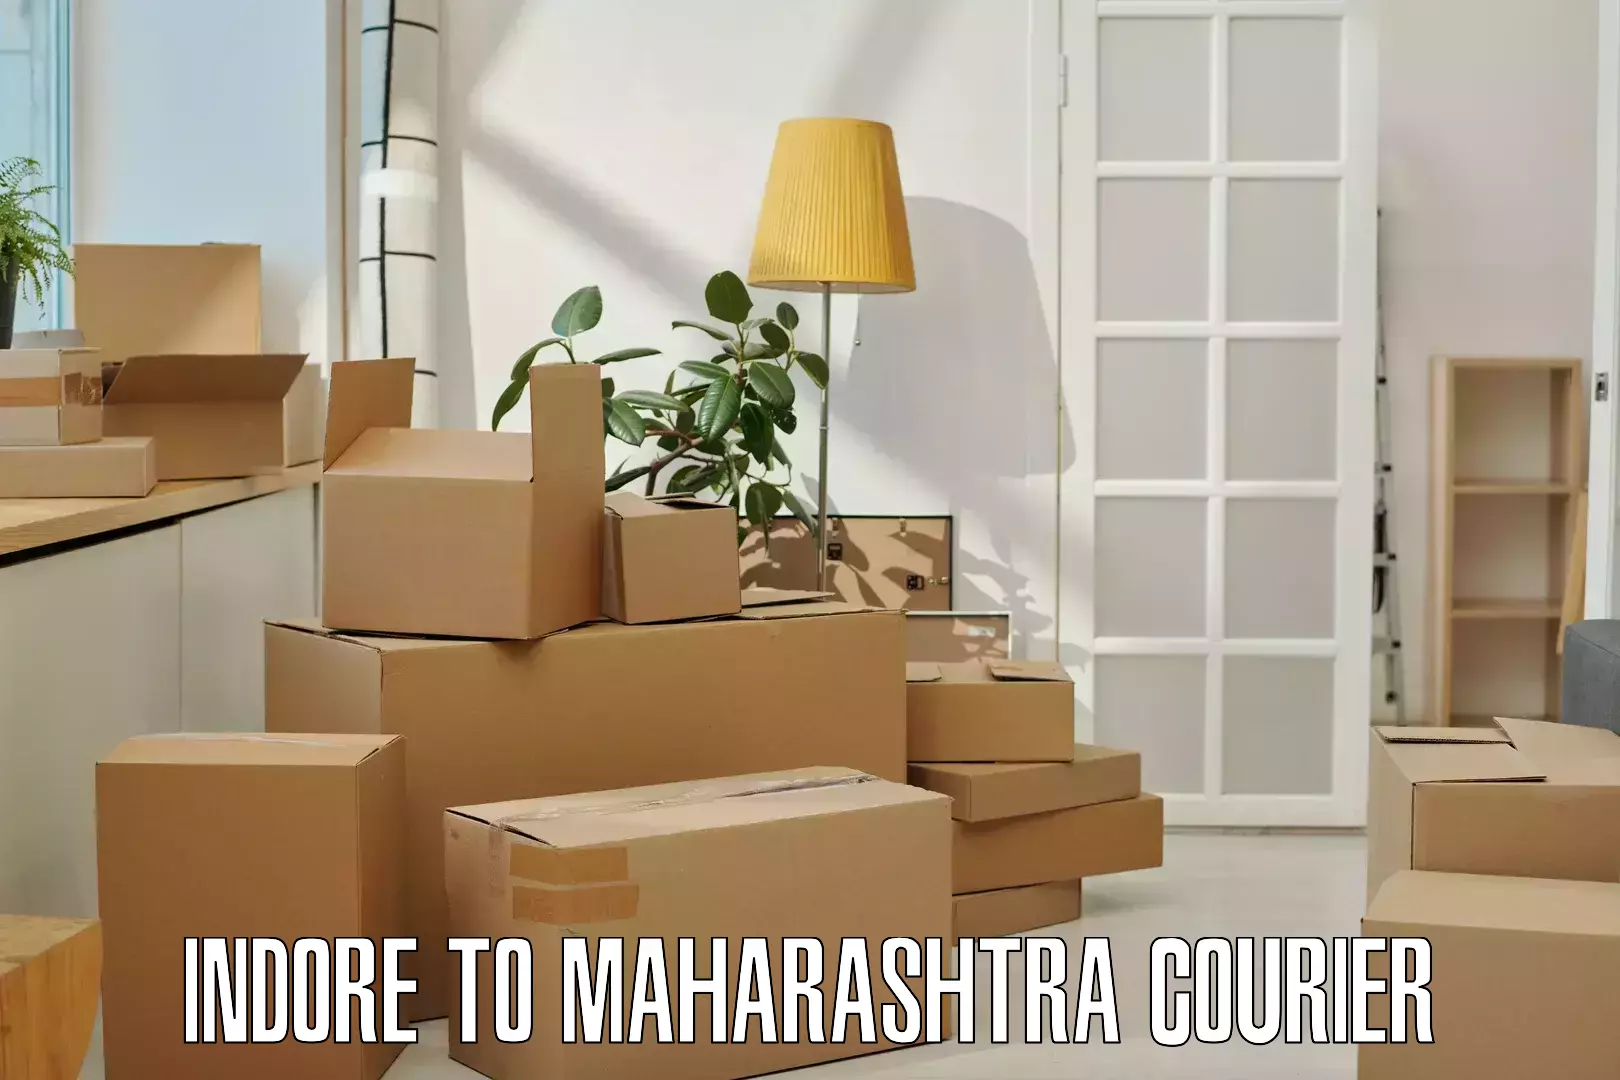 Same-day delivery options Indore to Maharashtra